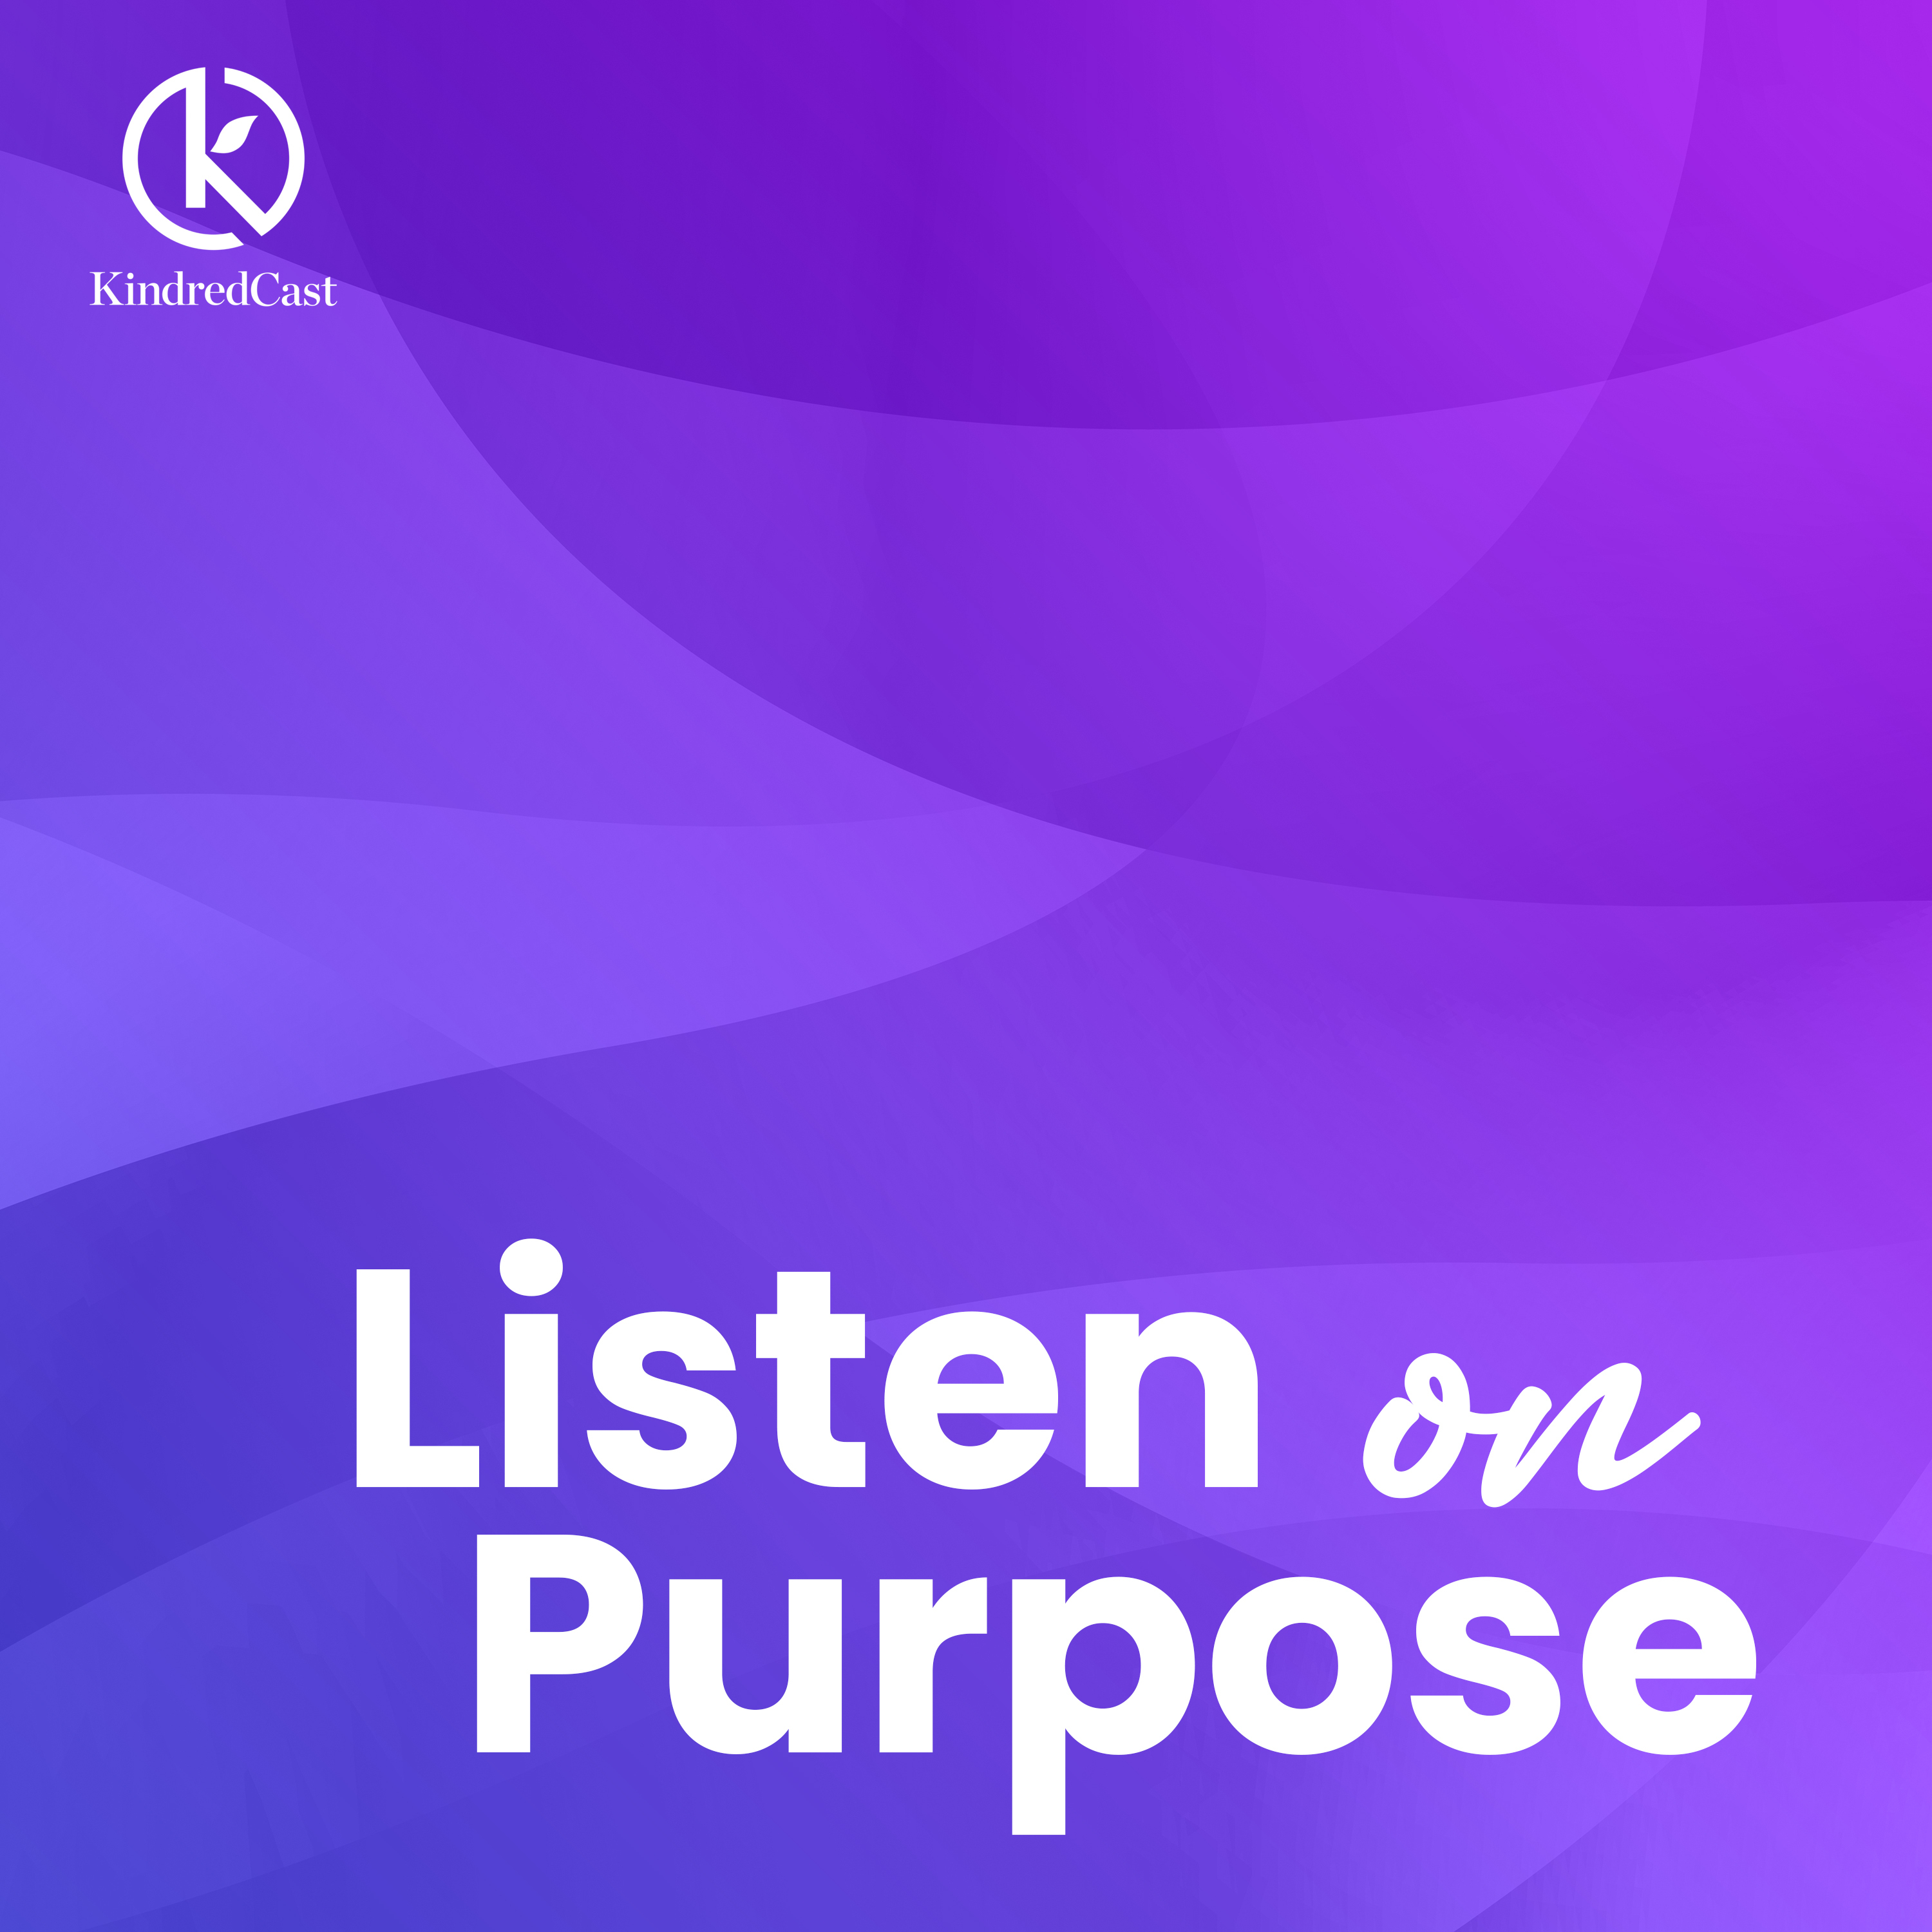 Listen on Purpose: Choosing Kindness (with Kevin Martinez)